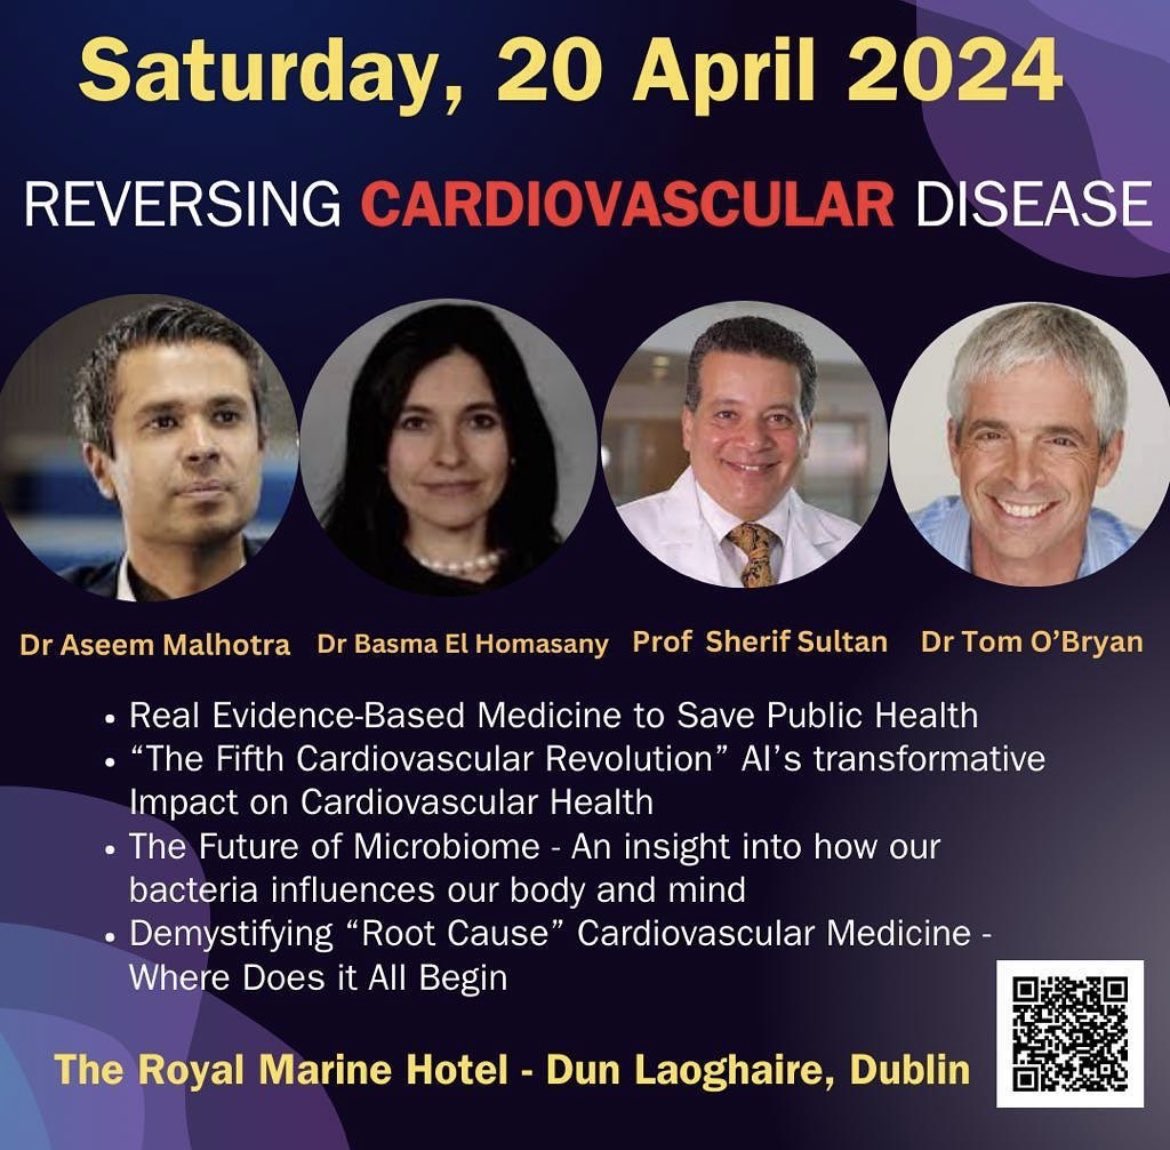 Anthony Fauci is visiting Dublin. I’m giving a talk there on Saturday. Perhaps we should invite him and ask him what he thinks is driving the excess deaths 🤔